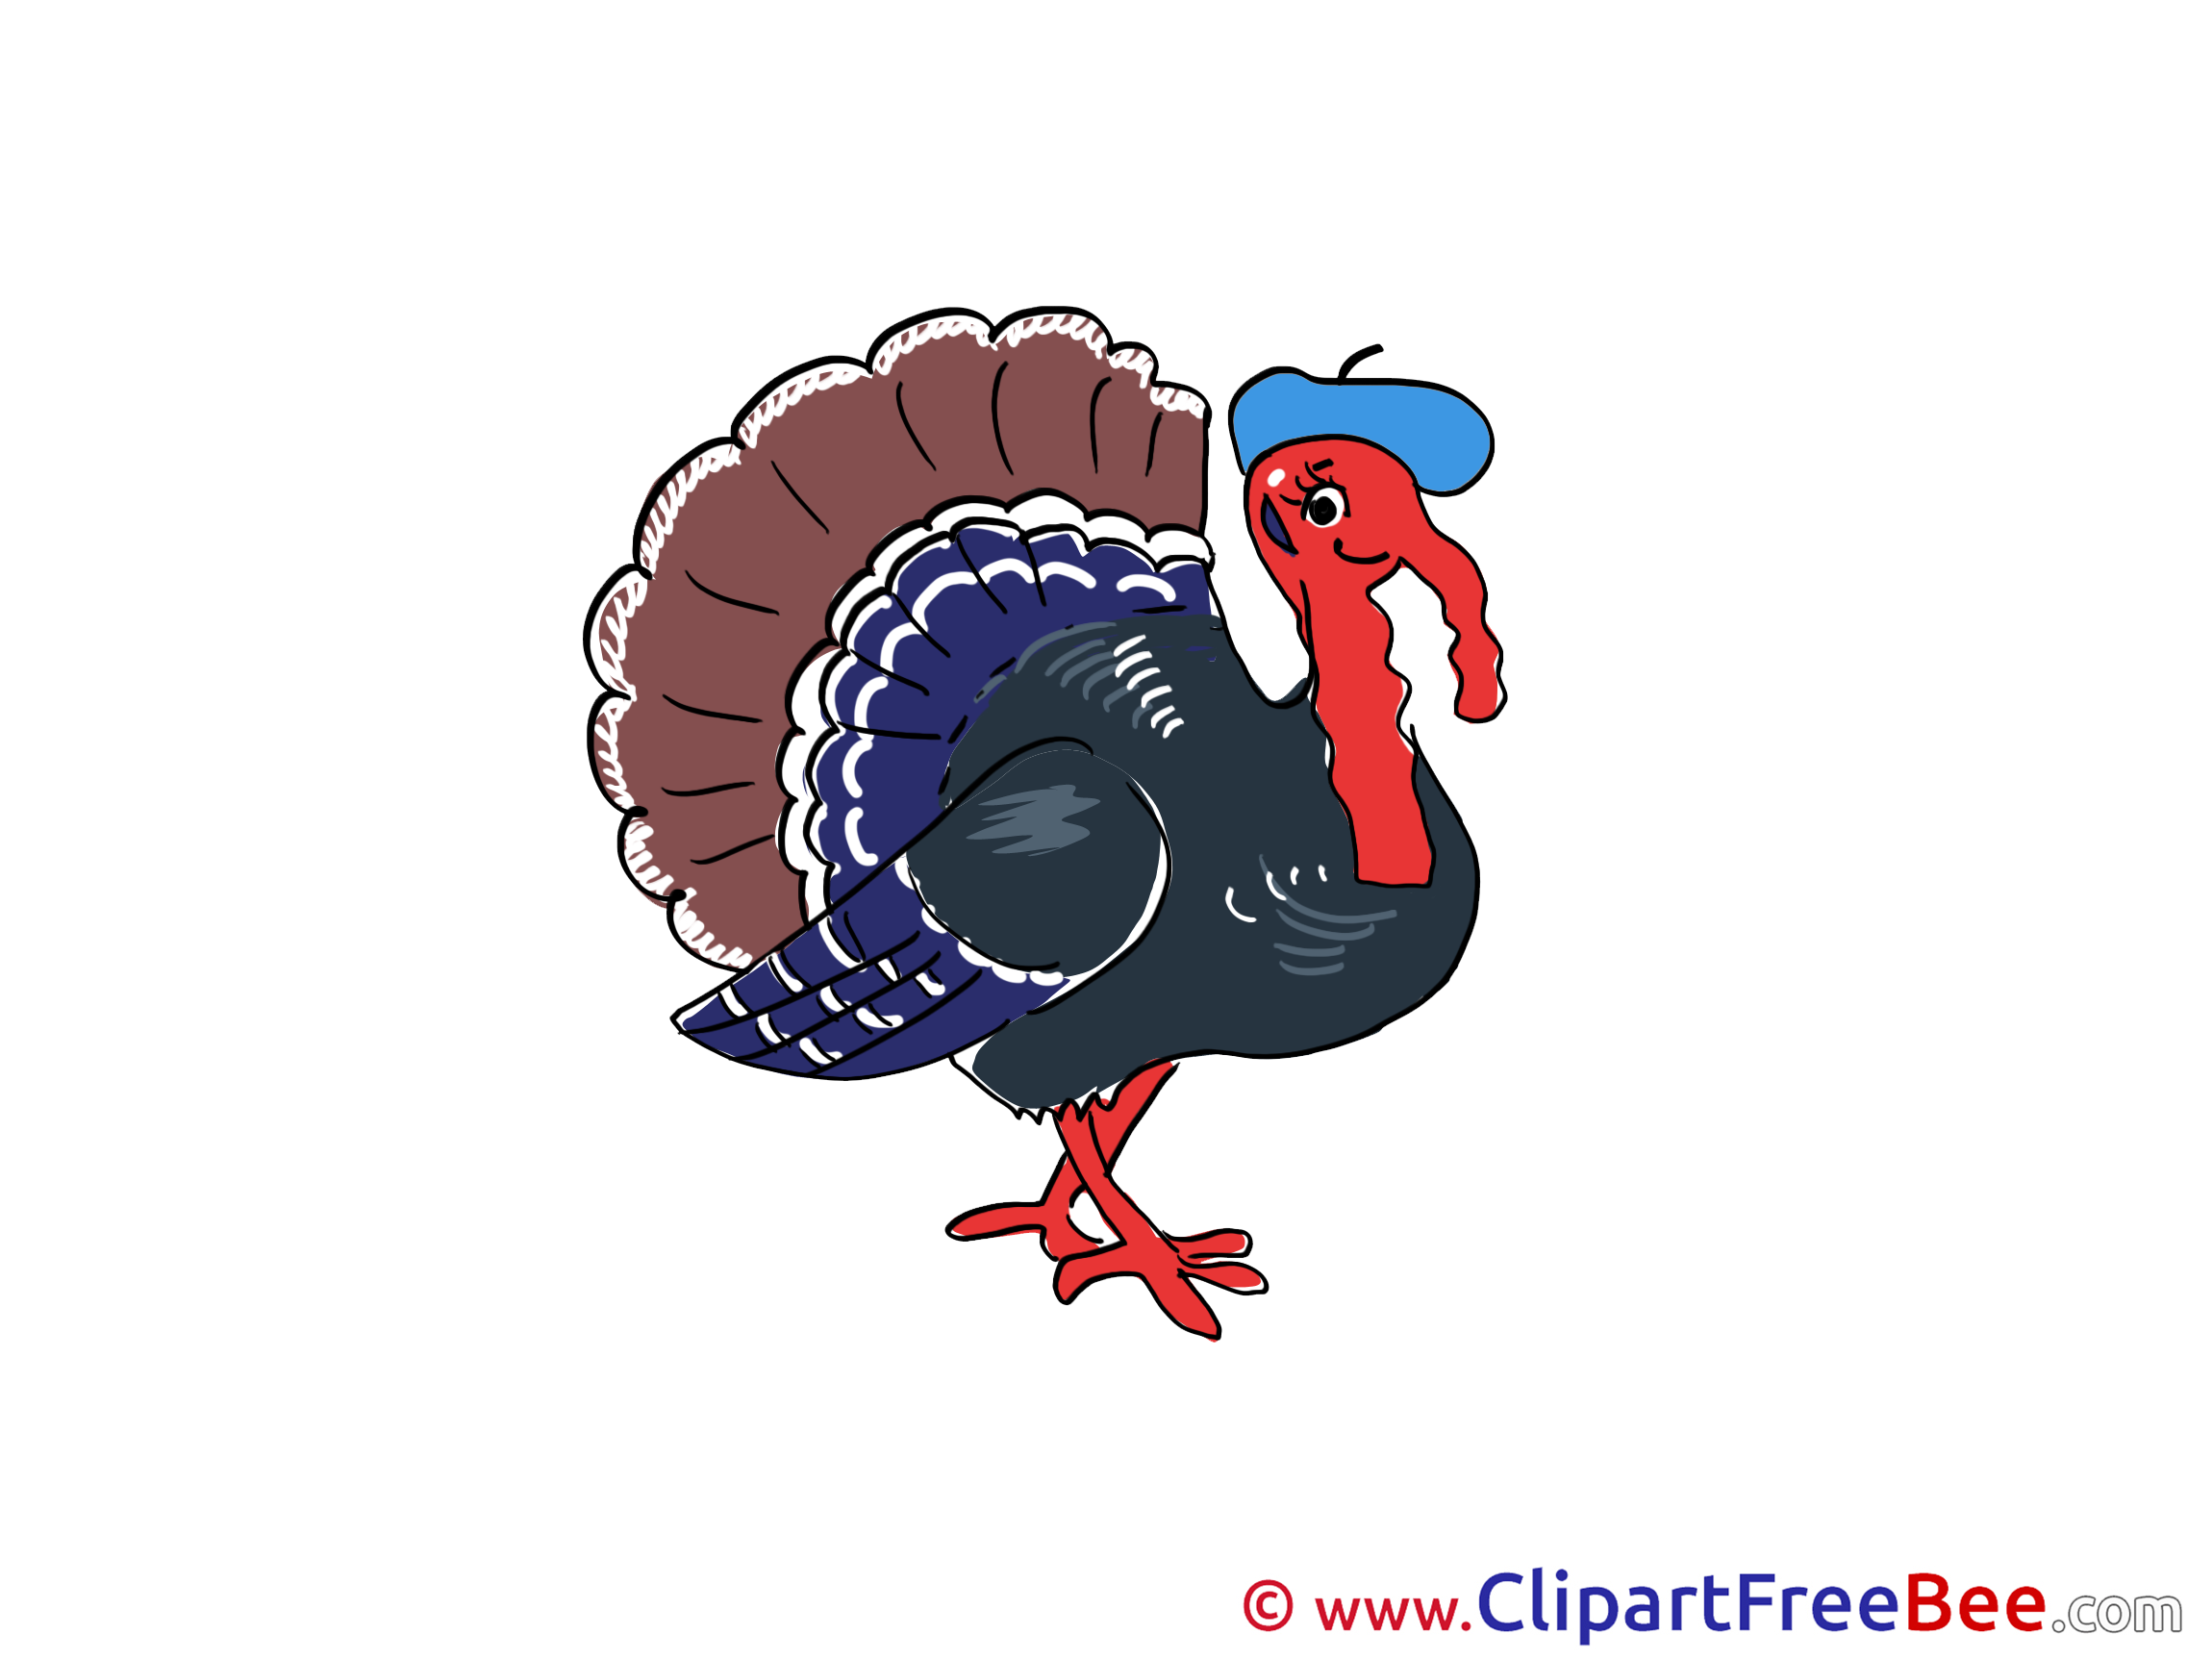 Turkey printable Images for download